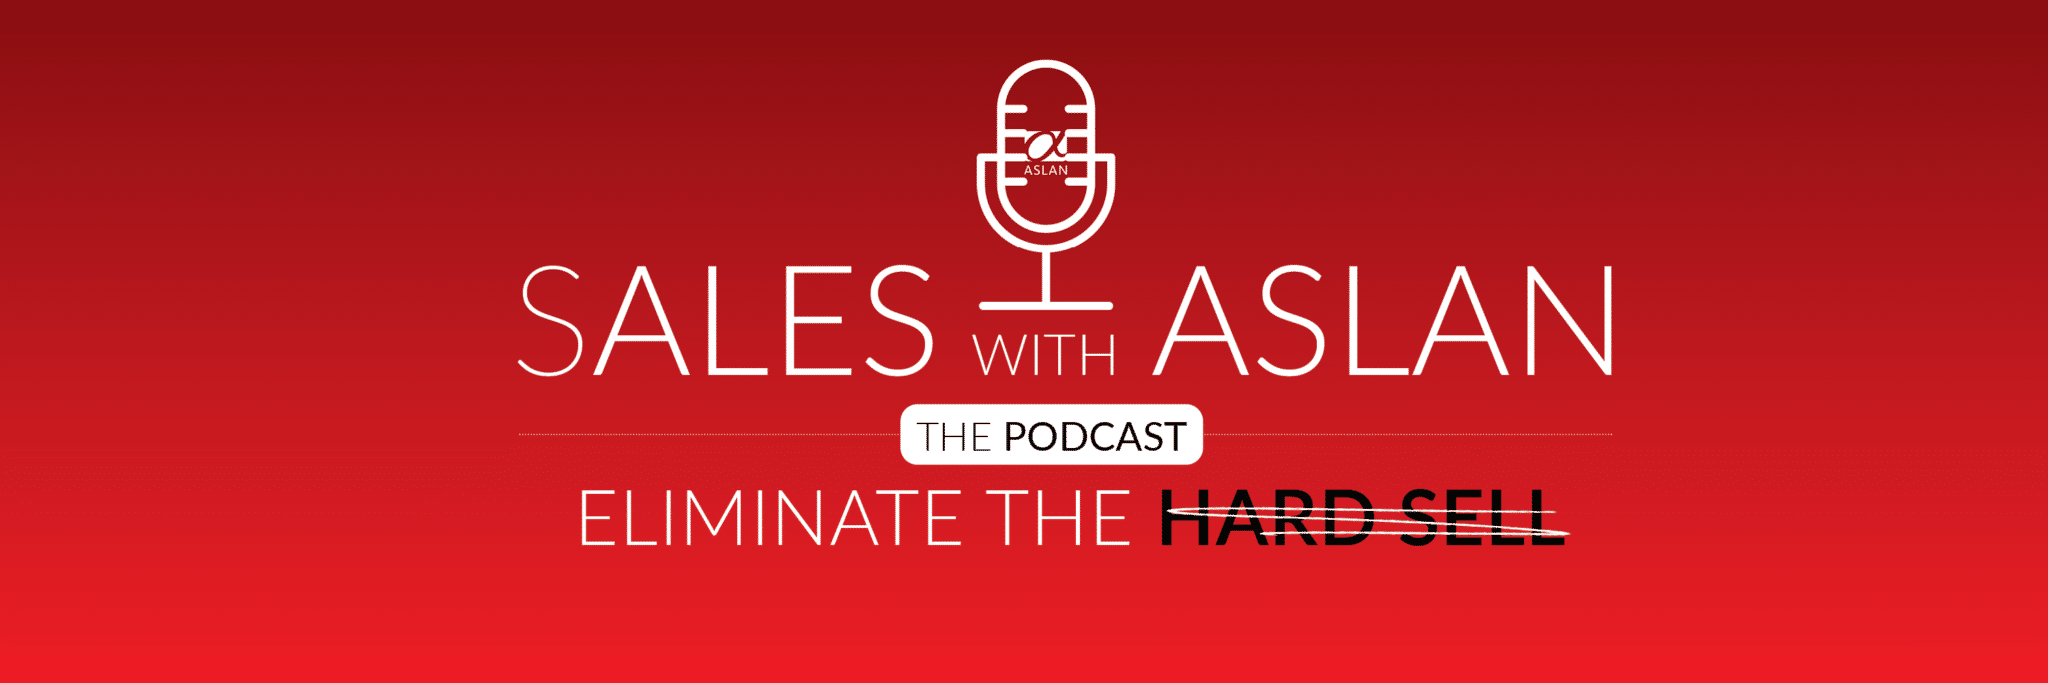 In this episode, Tom and Tab are joined by special guest, Jesse Rome, our new VP of Training here at ASLAN. In what our hosts claim to be “the best episode ever,” the guys share their perspectives on selling in a post-COVID world. They unpack how we’ve had to shift our approach to selling, how to be effective sellers in a hybrid work environment, and best practices for what seems to have taken hold as our “new normal.”